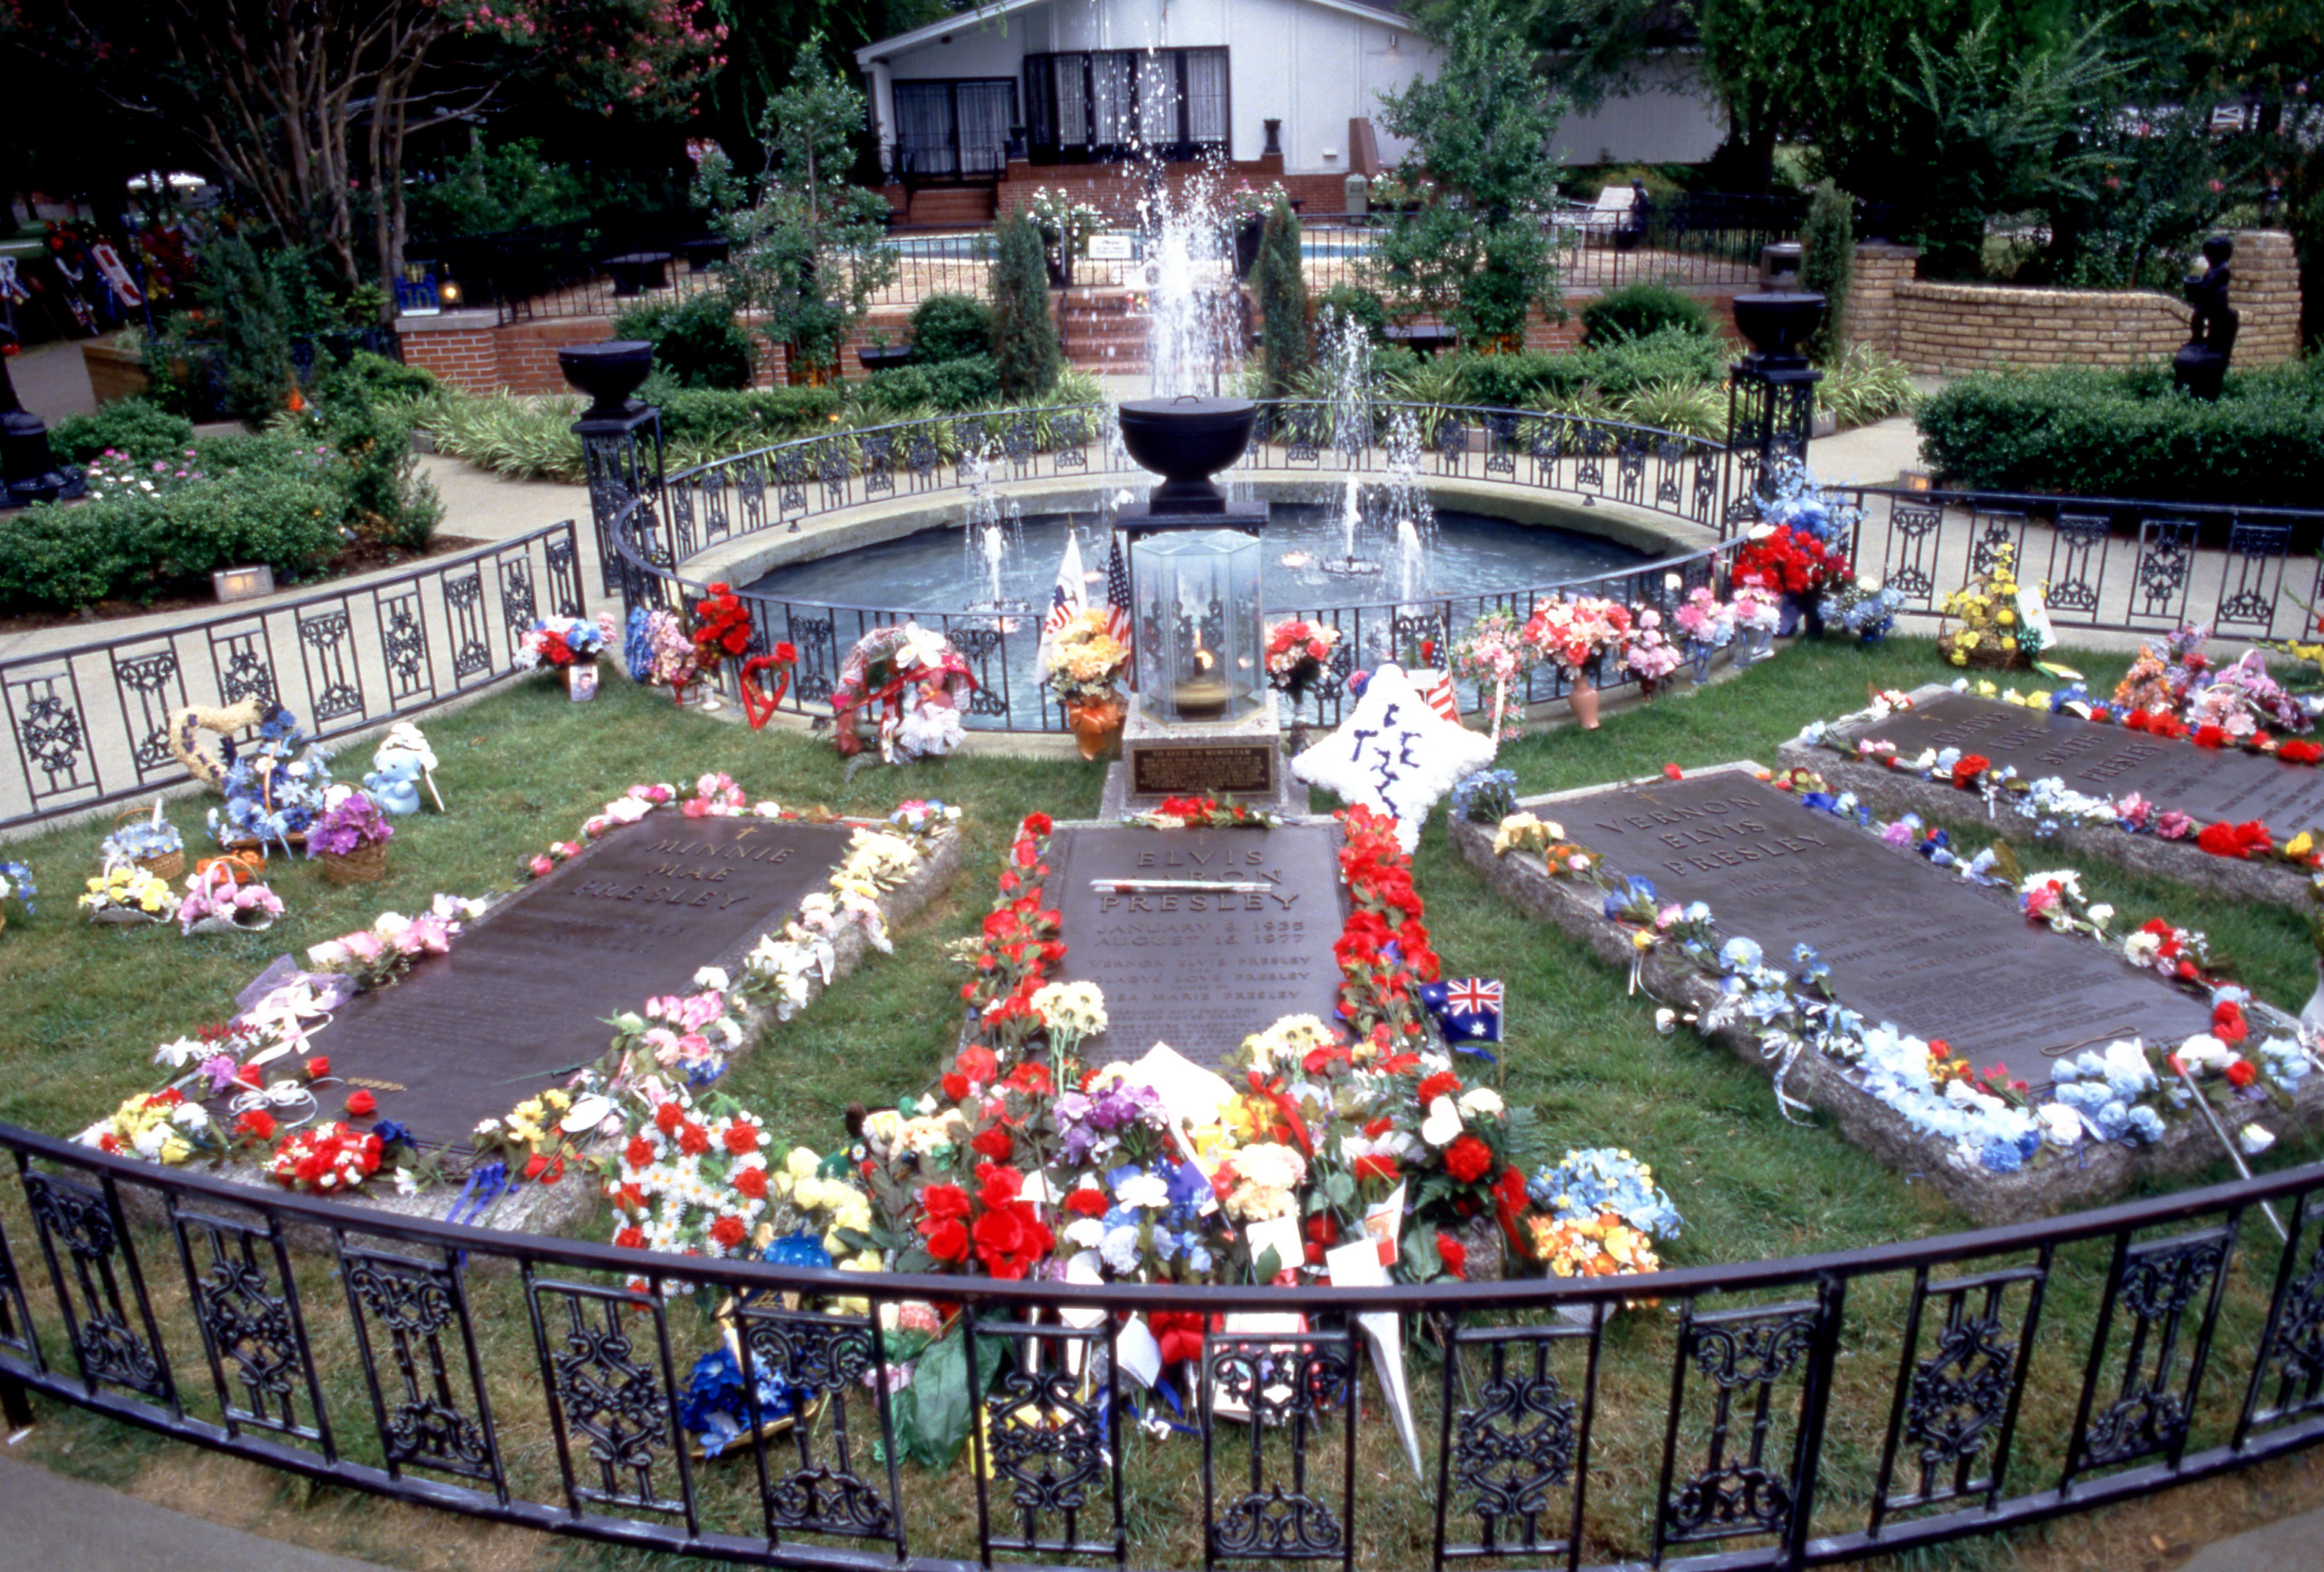 The headstones for Minnie Mae Presley, Elvis Aaron Presley, Vernon Elvis Presley and Gladys Love Smith Presley are surrounded with flowers, gifts, and decorations, prior to the 10th Anniversary of Elvis' death on August 15, 1987 at Graceland in Memphis, Tennessee | Source: Getty Images 